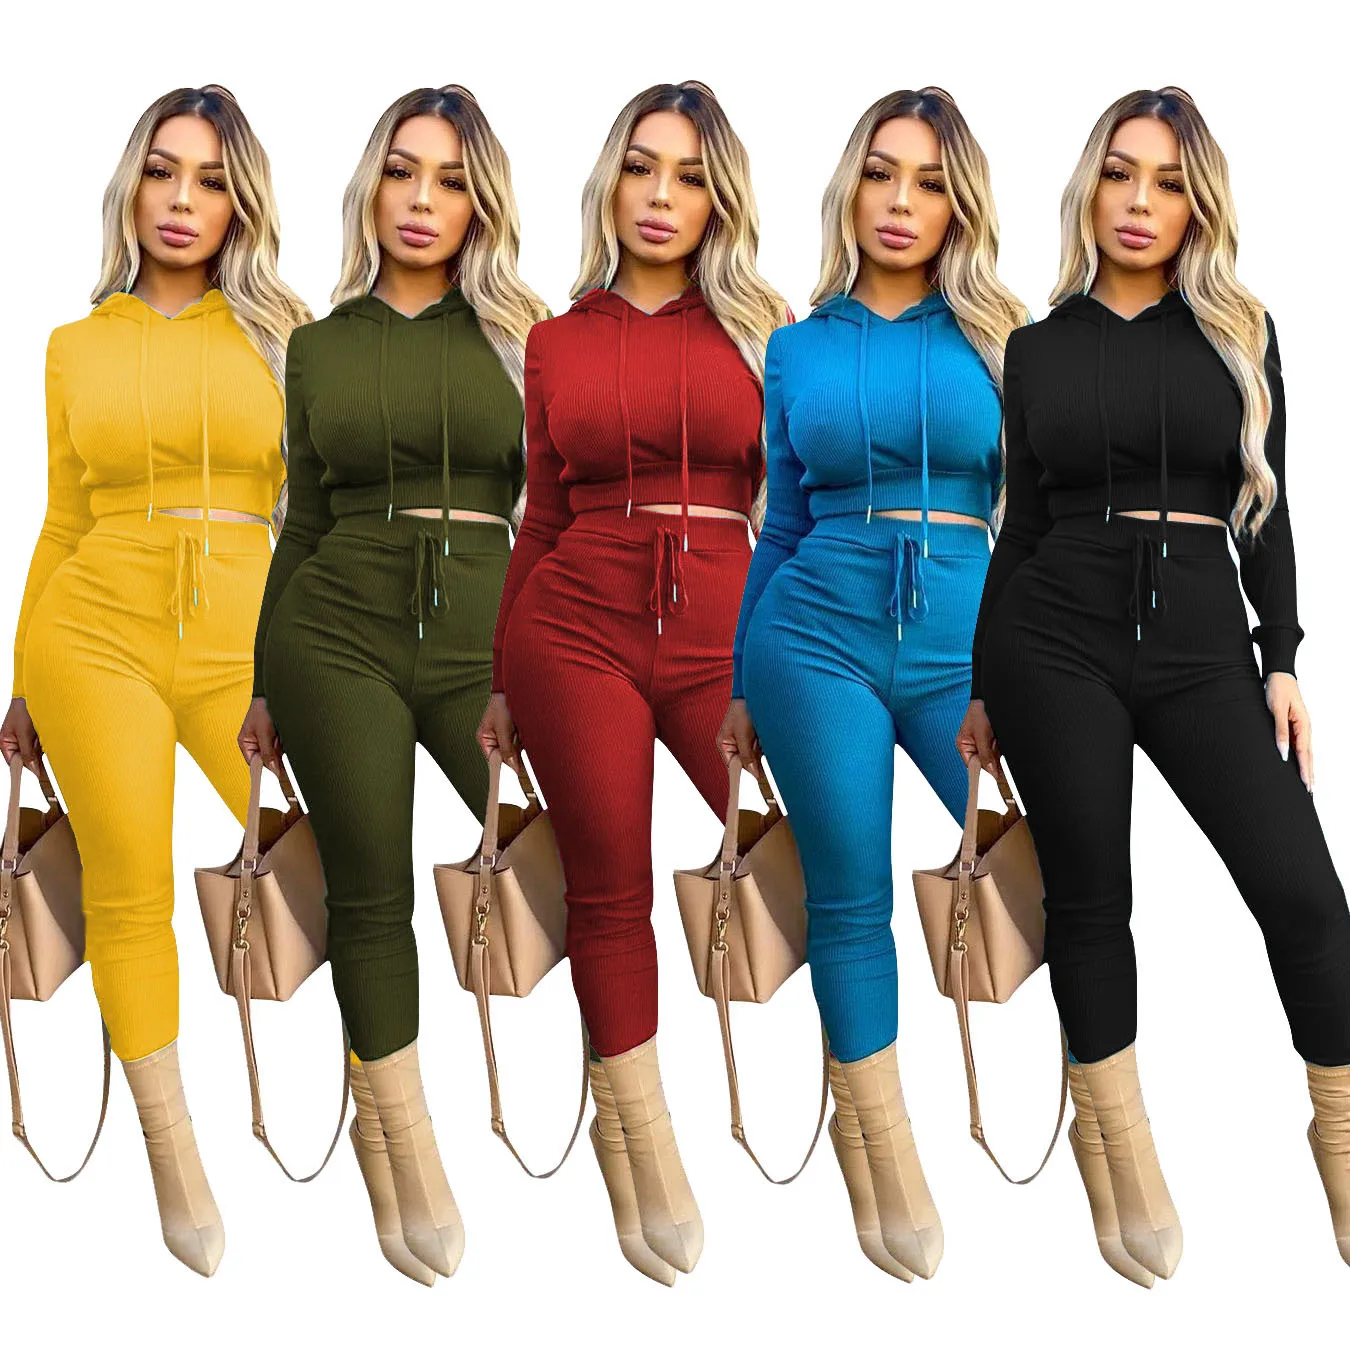 

Sil-u summer RIB knit long sleeve lightweight crop top hoodie and joggers sets women two piece pant set outfits lounge sweatsuit, Black/yellow/green/red/yellow